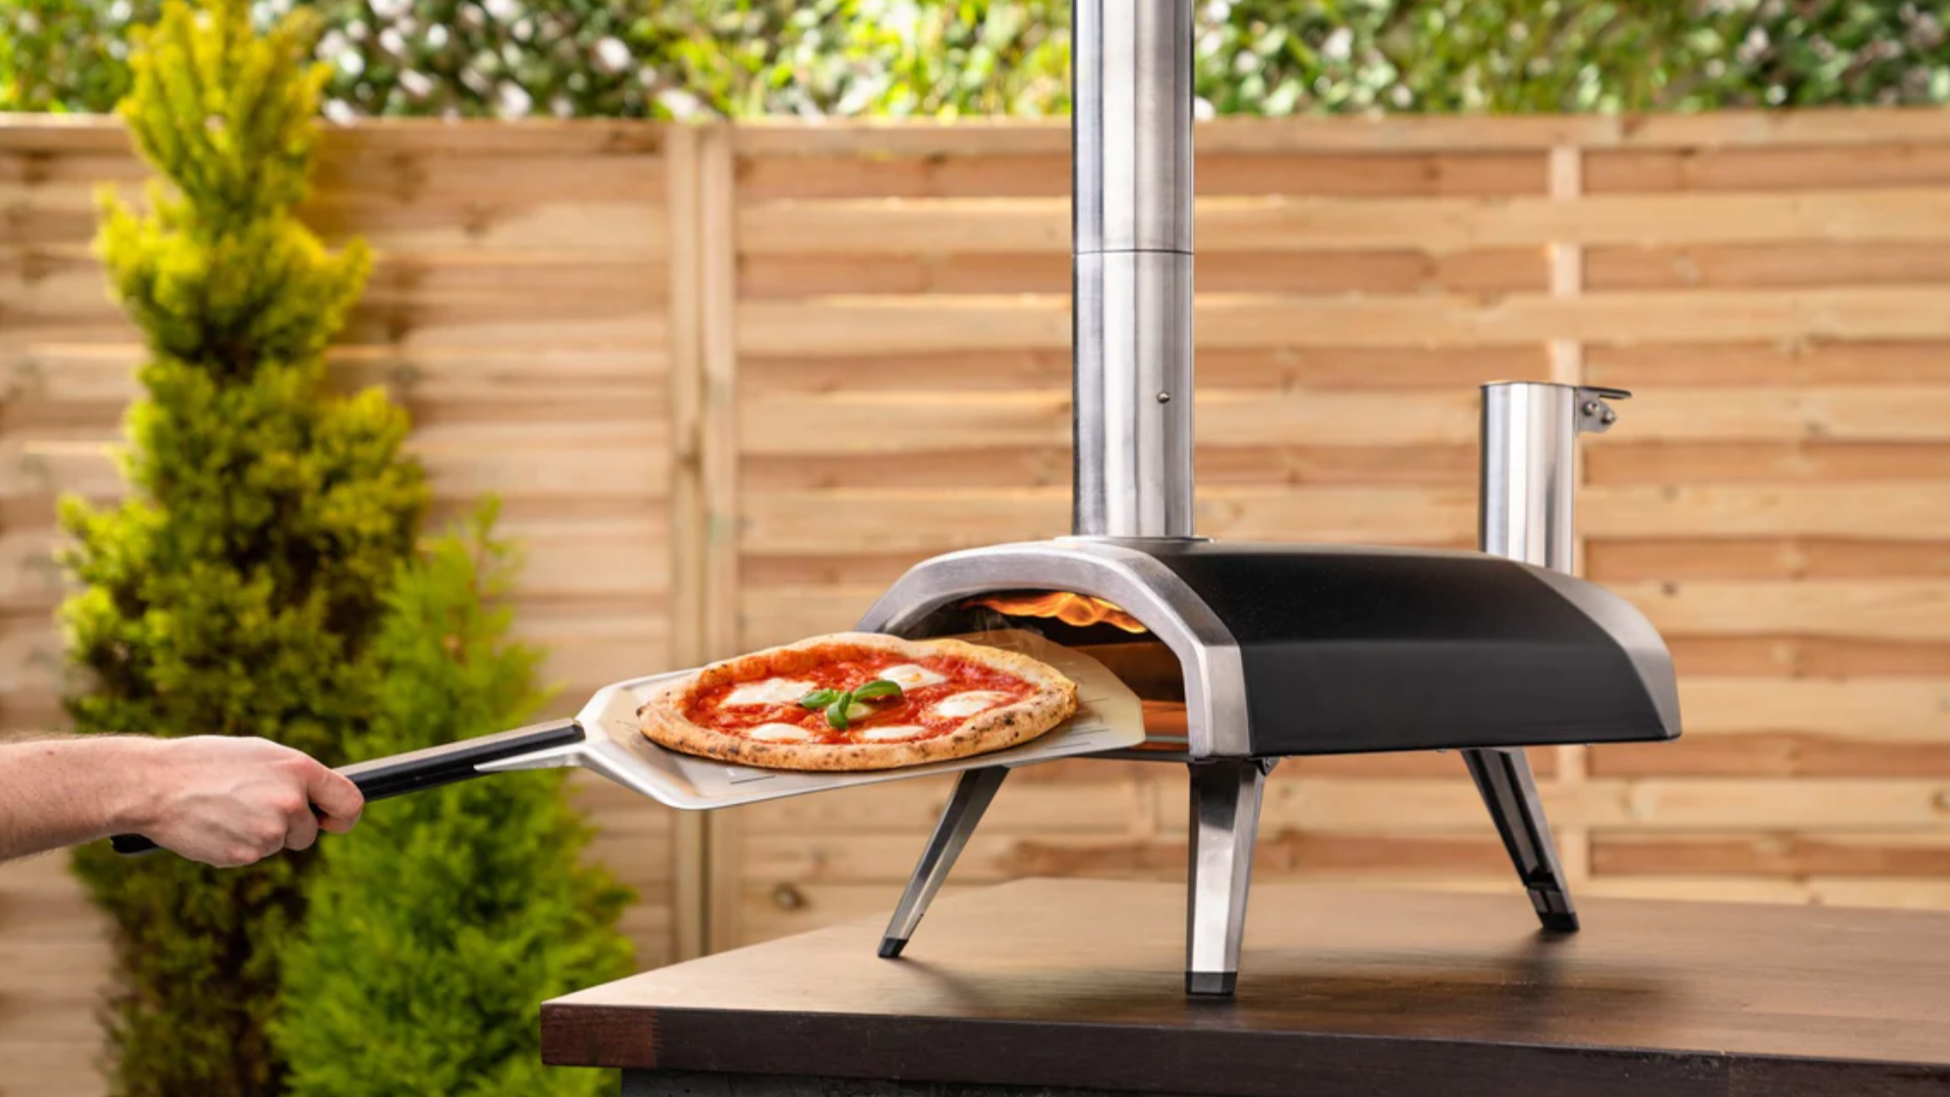 hand reaching for pizza from the ooni pizza oven, which is placed on a brown table